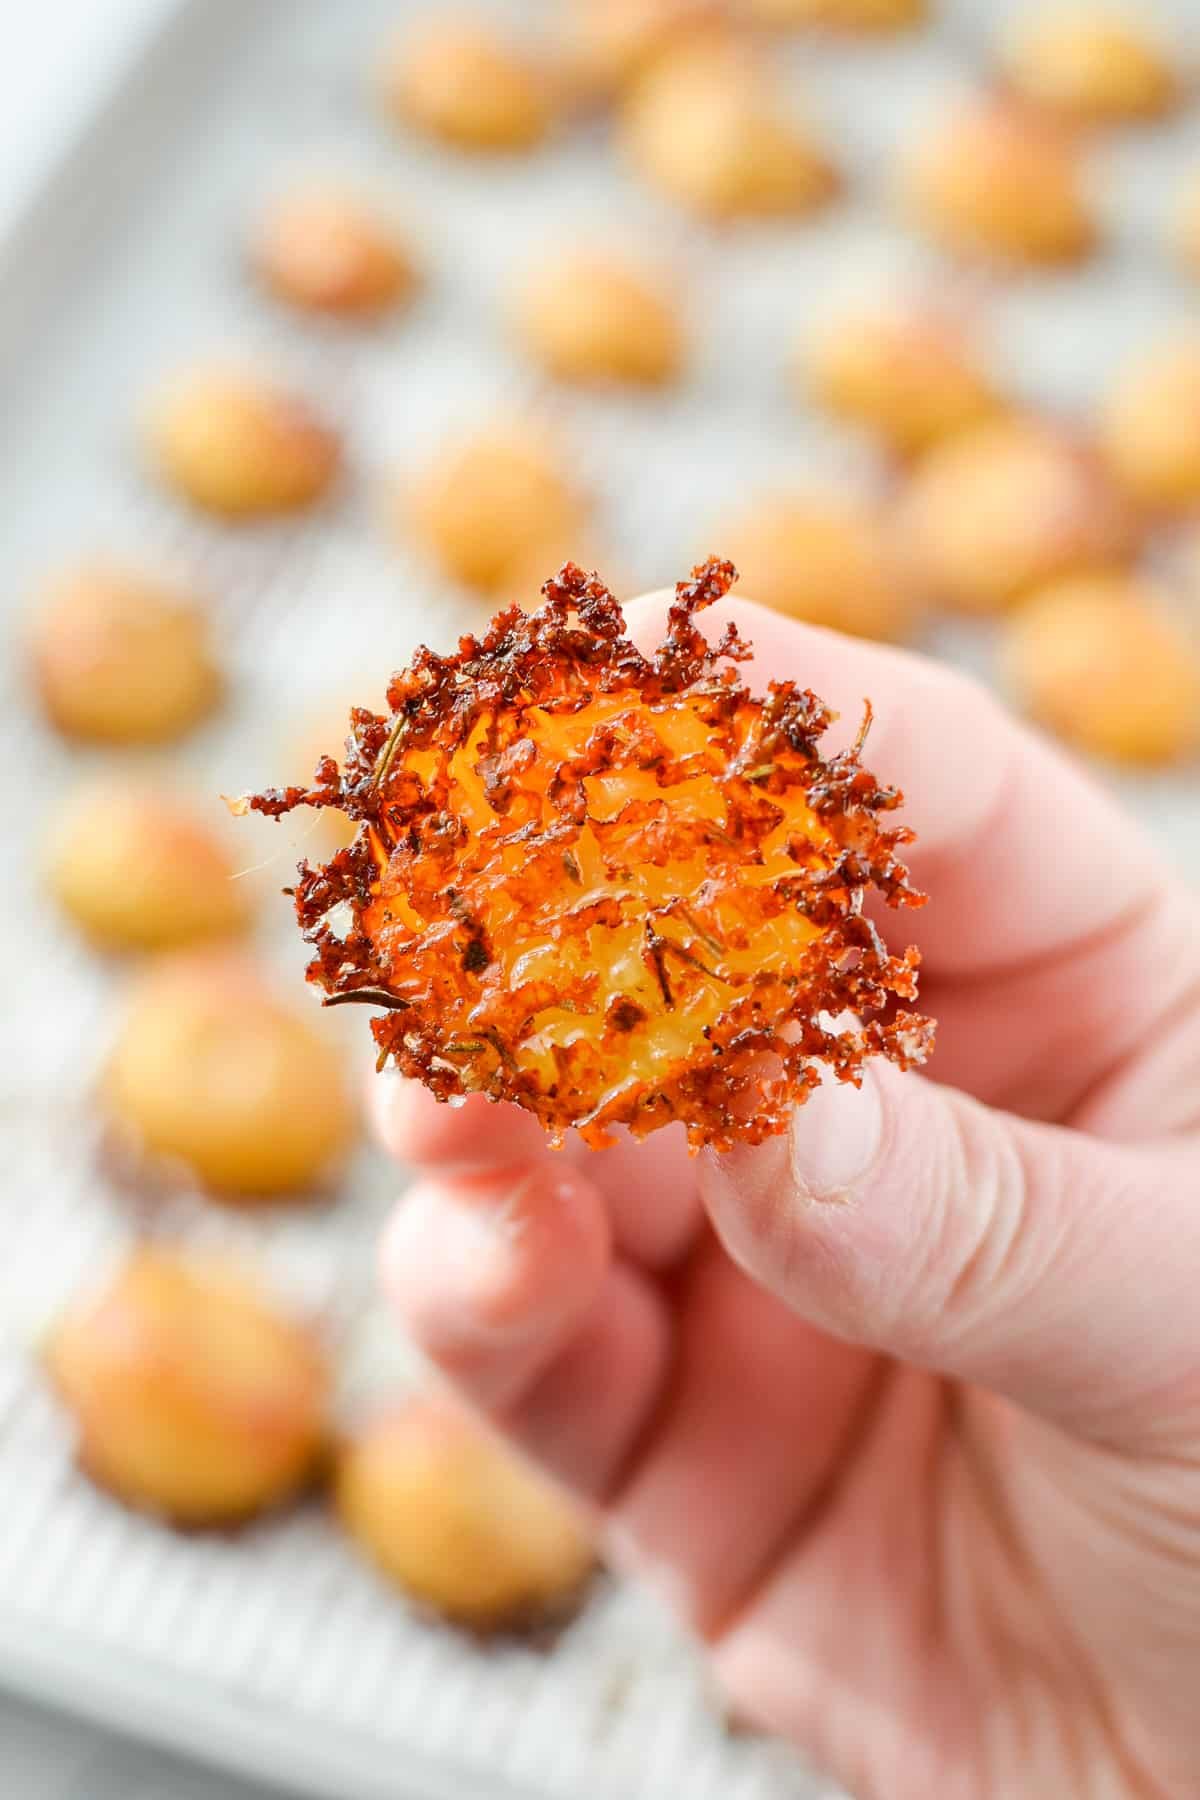 A halved baby potato encrusted with parmesan cheese.